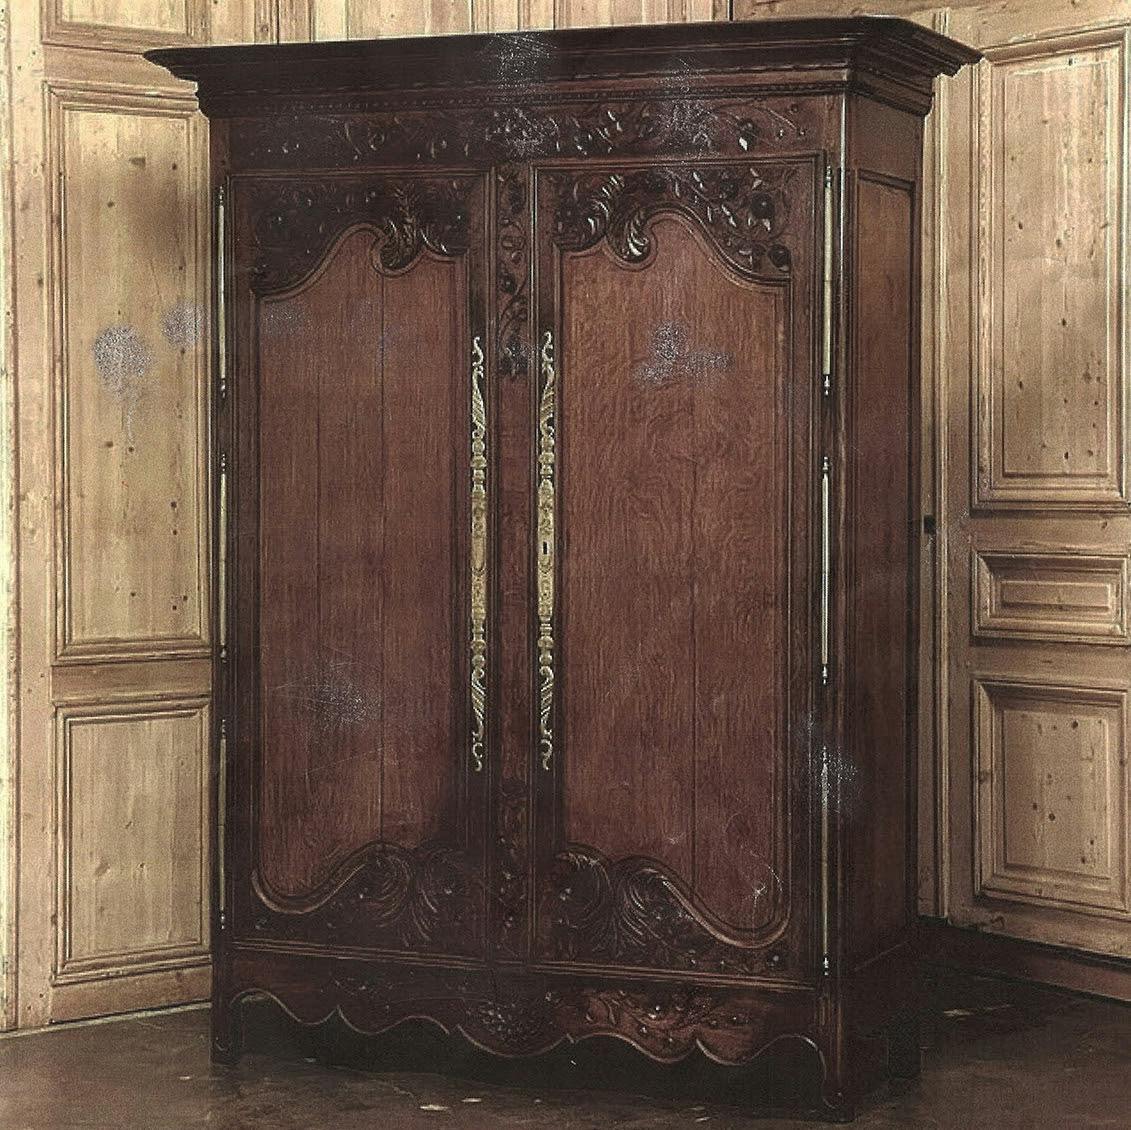 Photograph of an old hutch that has aged through time.